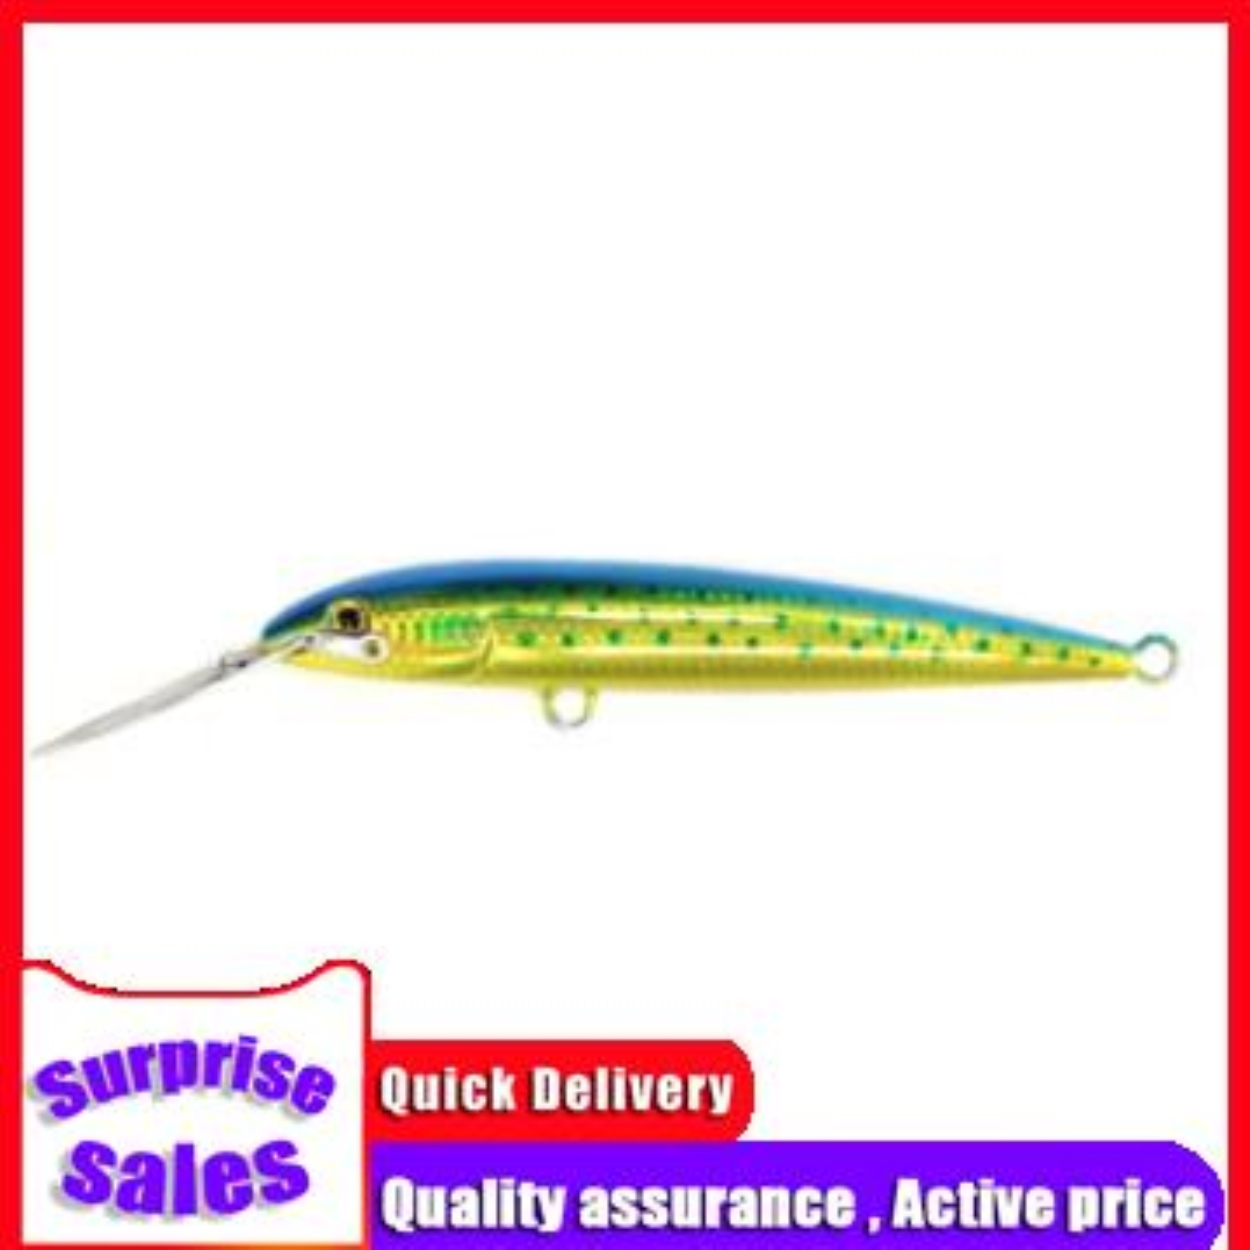 seasky 60g 8 30g 6 metal lip rapala Floating minnow lure with